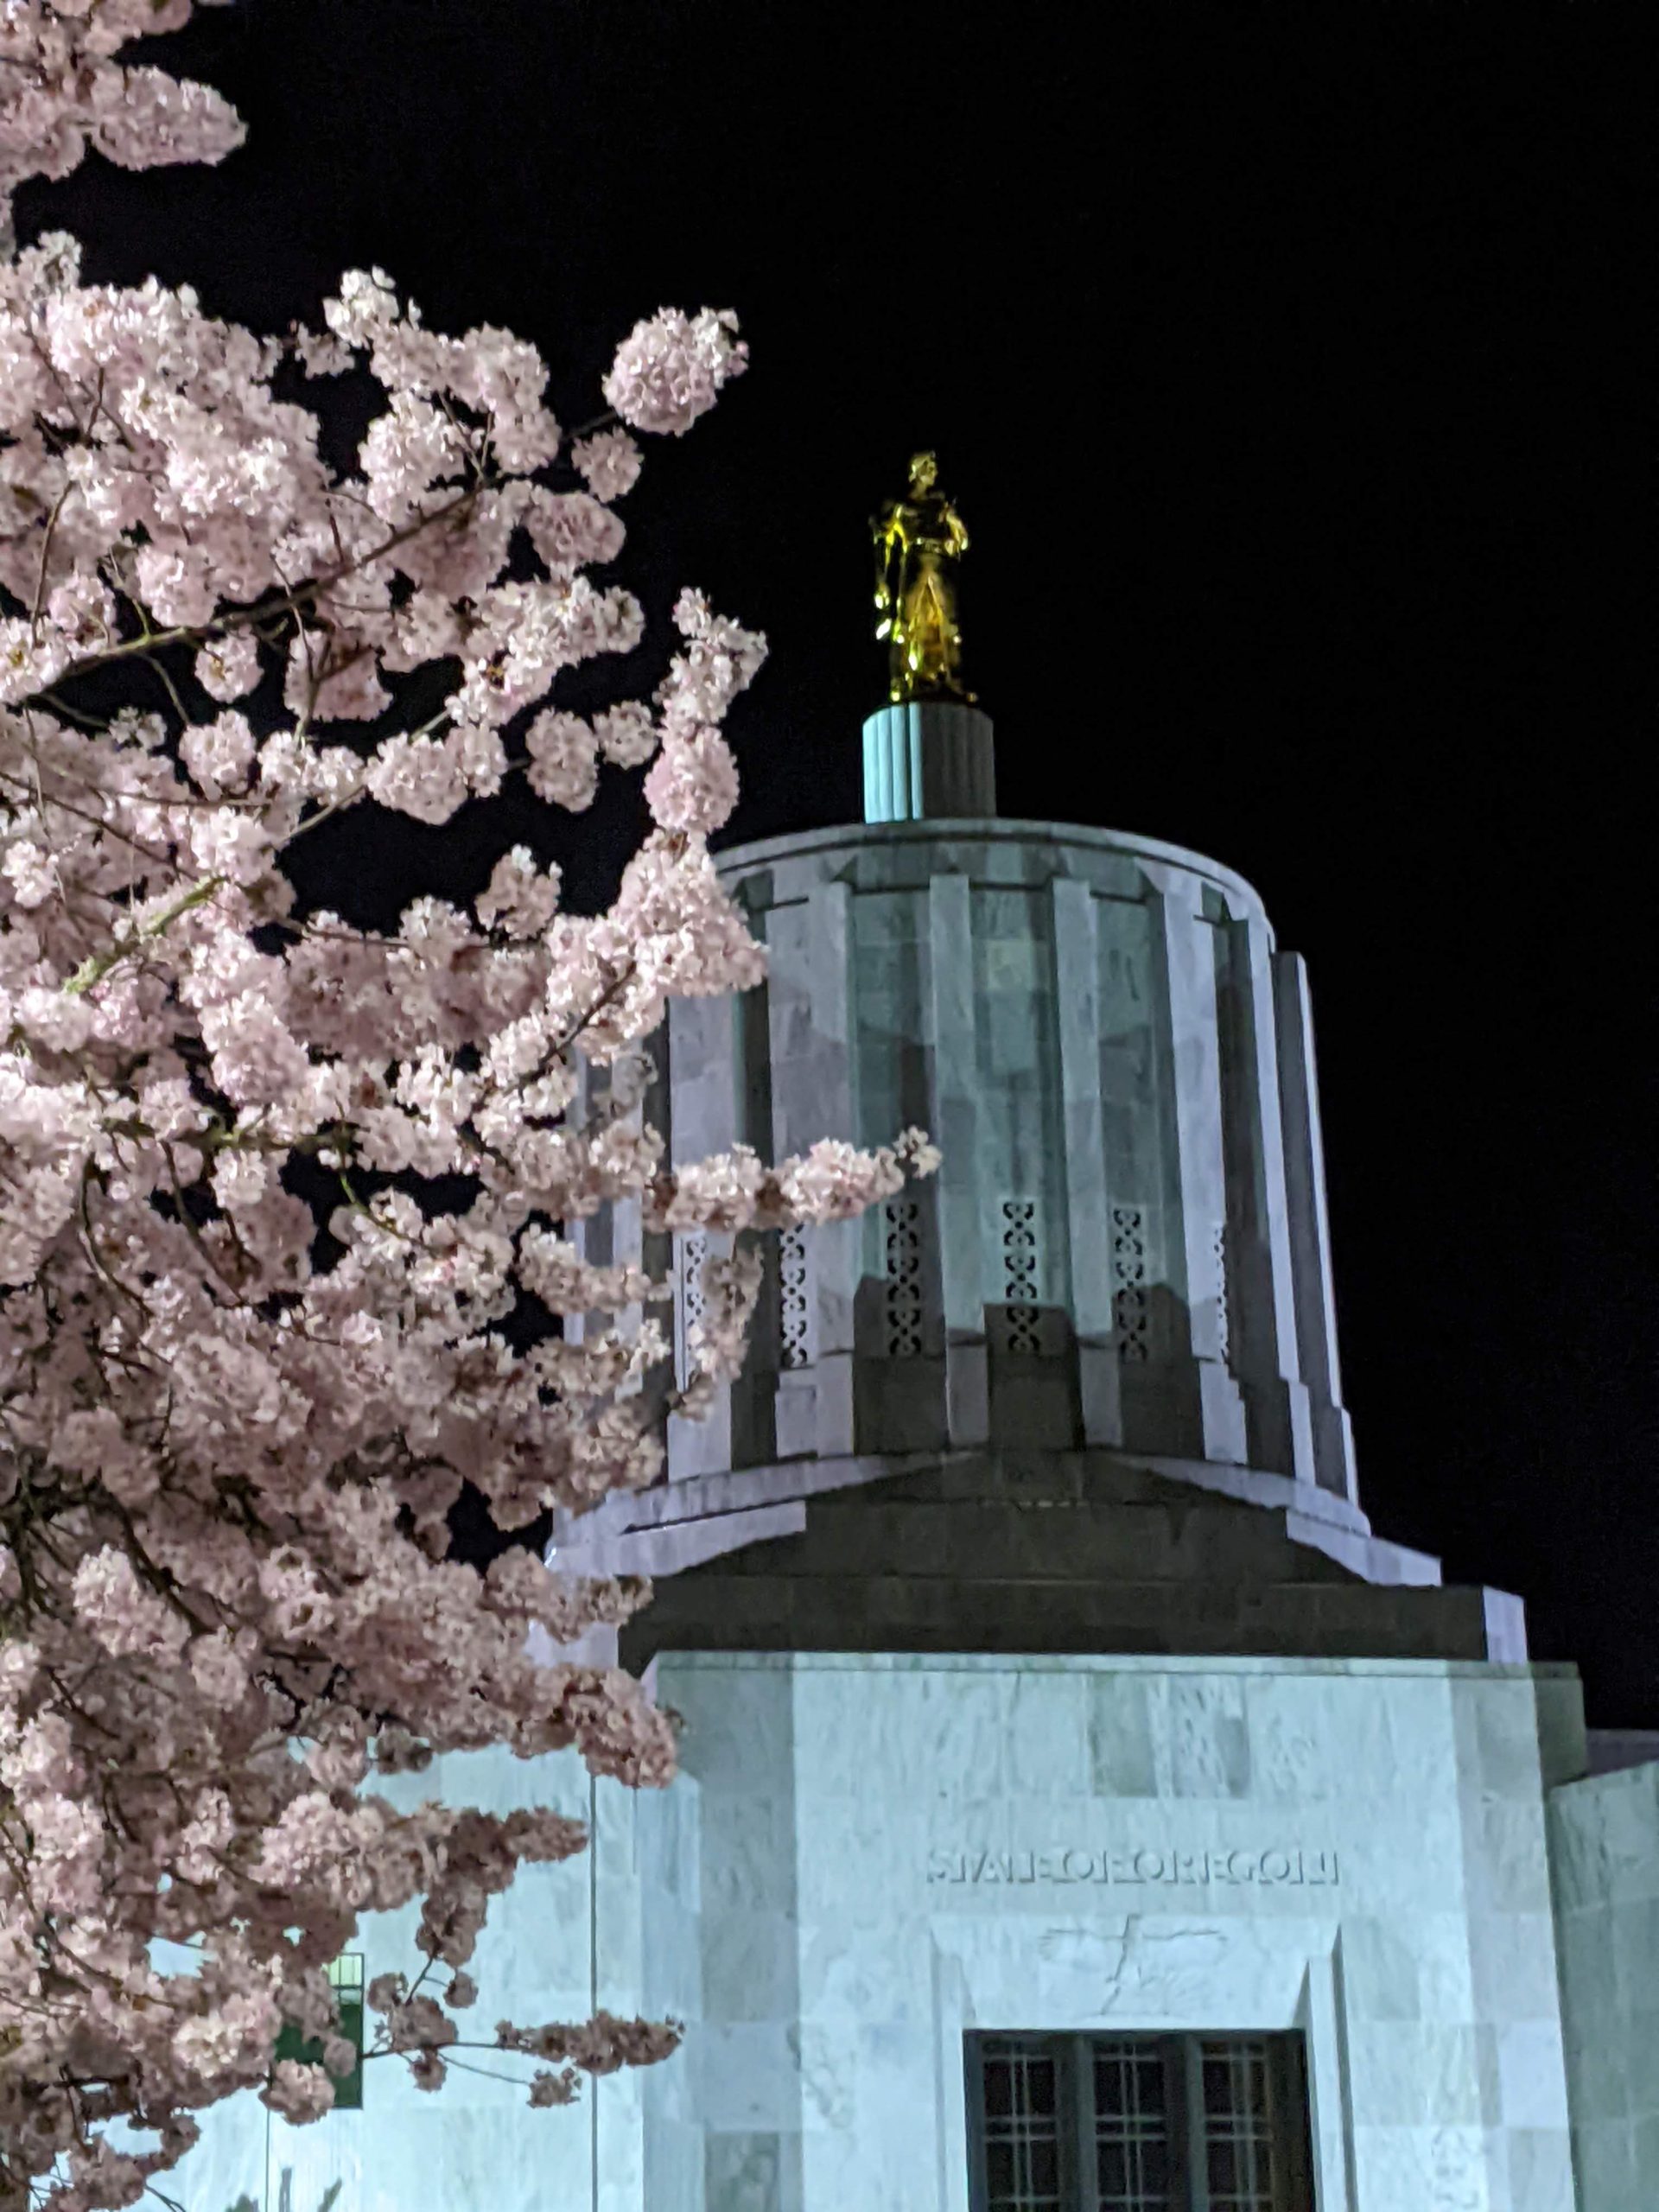 Oregon Pioneer at night with cherry blossom tree